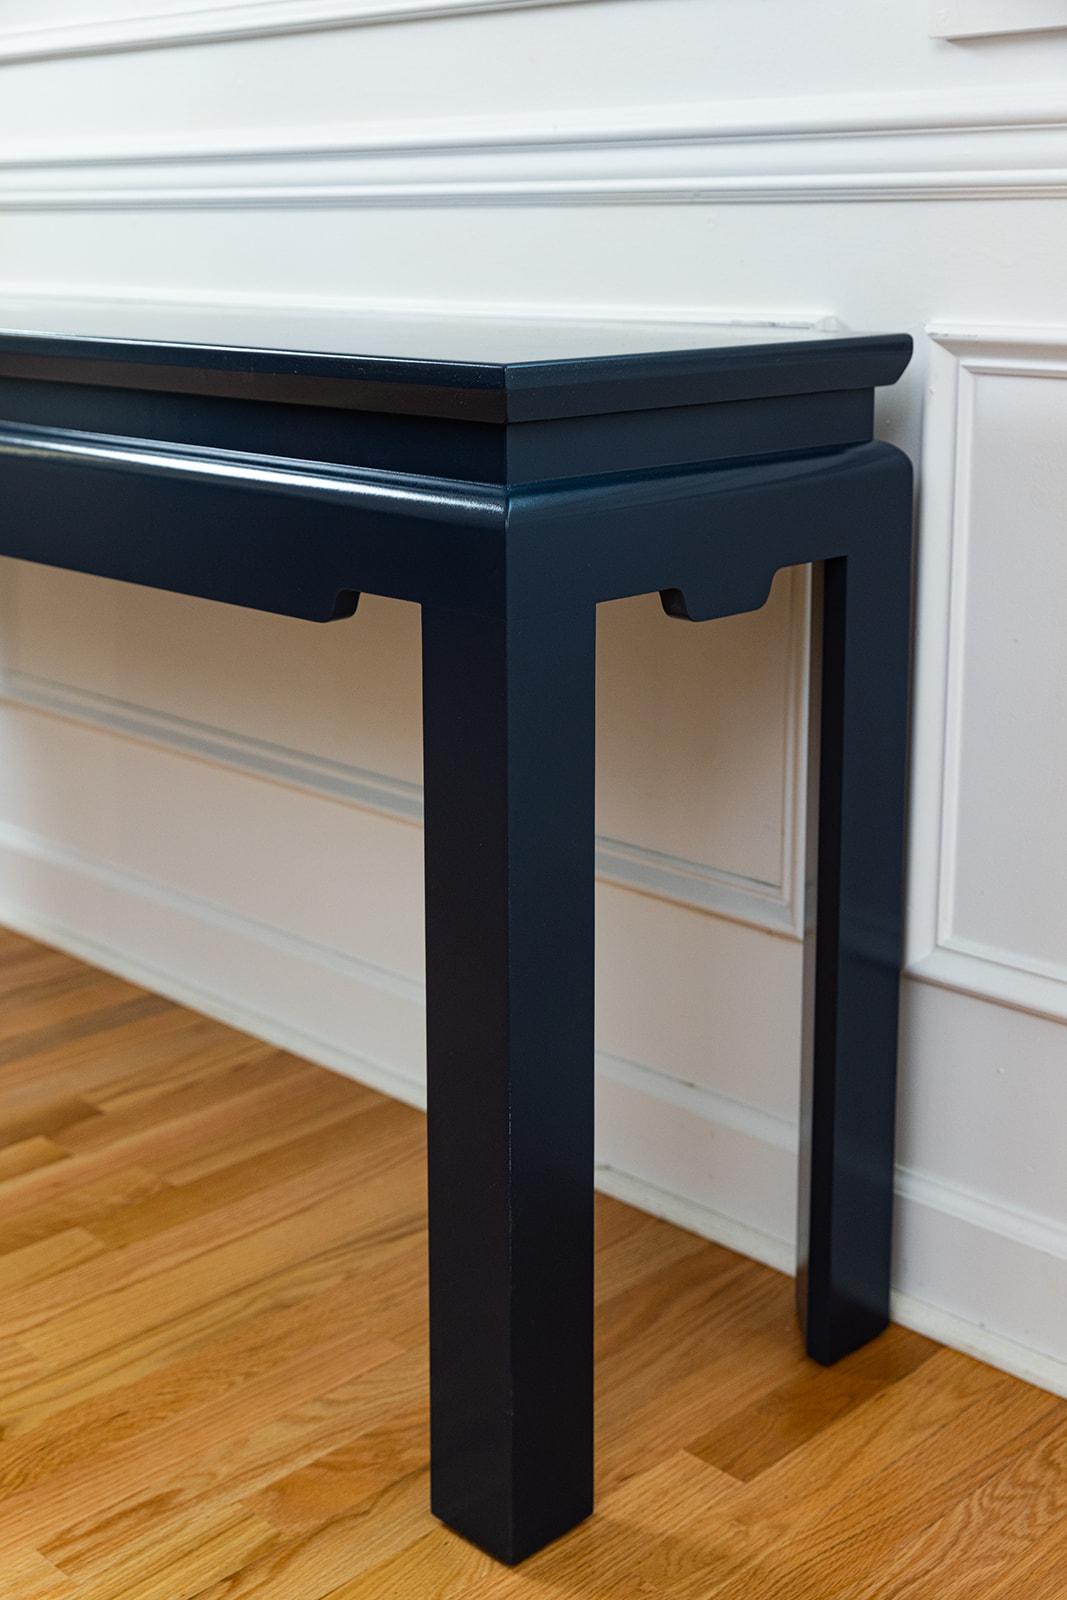 Contemporary Bespoke Modern Ming Console Table Custom Built and Lacquered Hale Navy Gloss For Sale